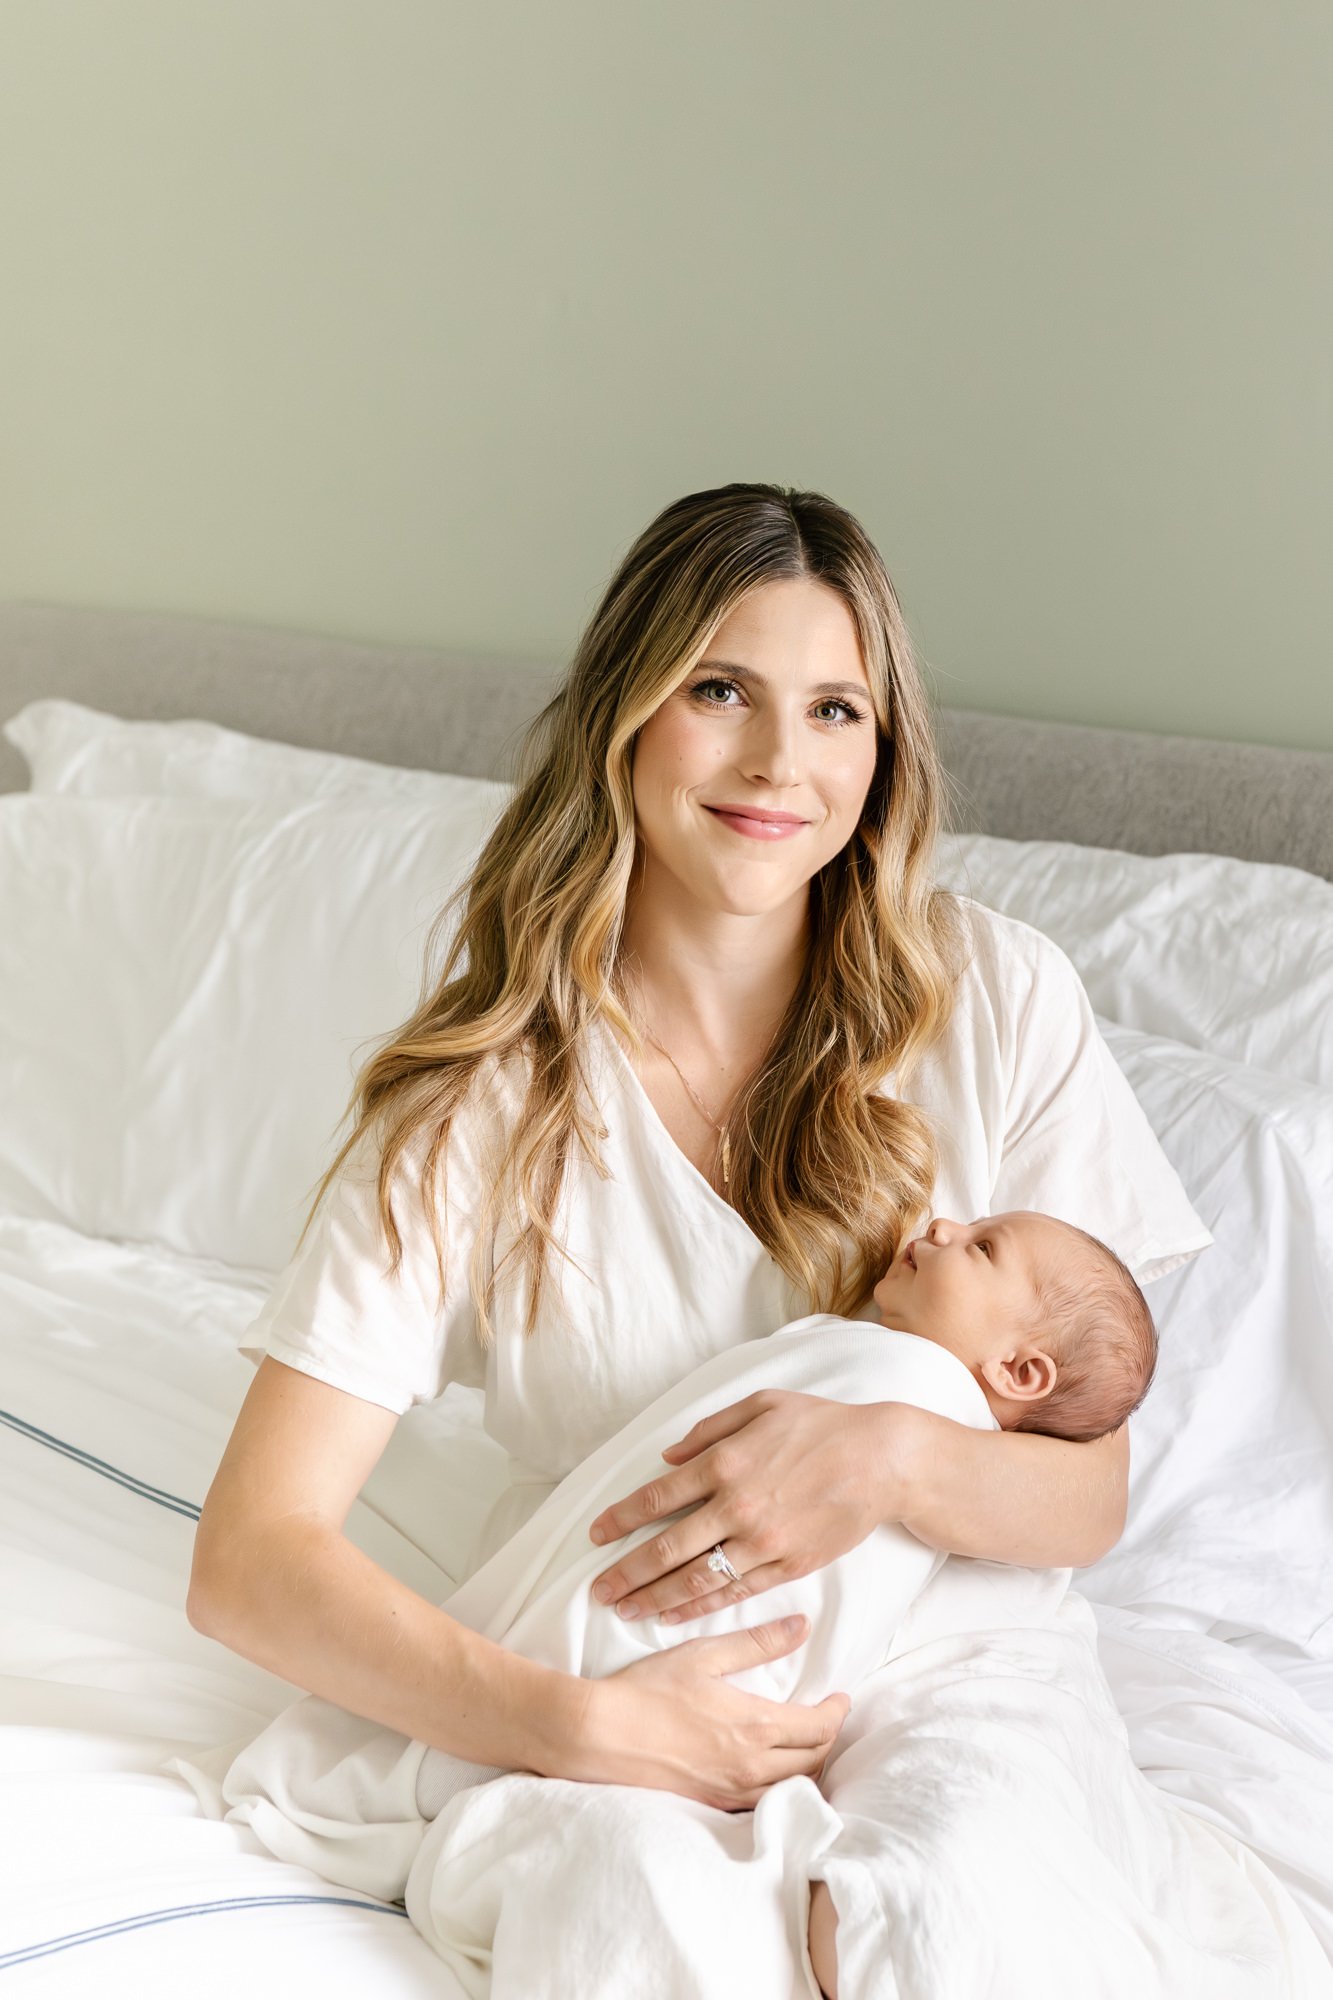  Mom sits on a queen size bed in a casual white dress while holding her precious newborn son in her arms for a natural, candid photo. #candidposeinspo #newbornphotography #shorthillsphotographer #familyphotographersinnewjersey #inhomeportraits #newbo